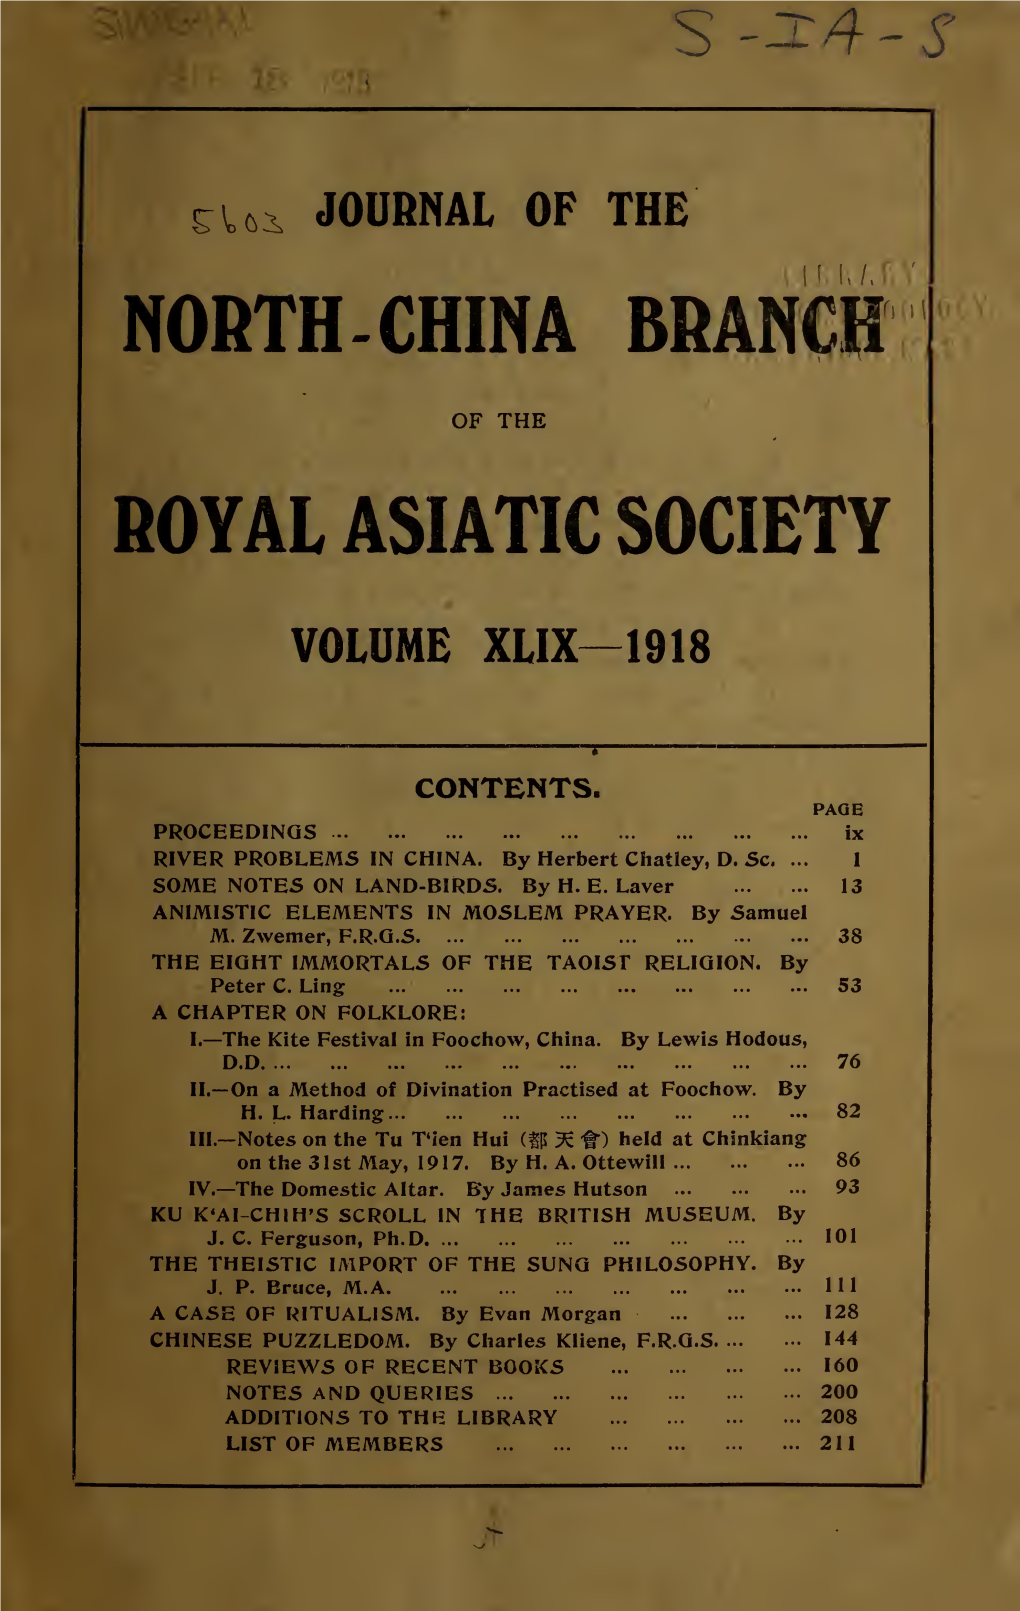 Journal of the North-China Branch of the Royal Asiatic Society for the Year